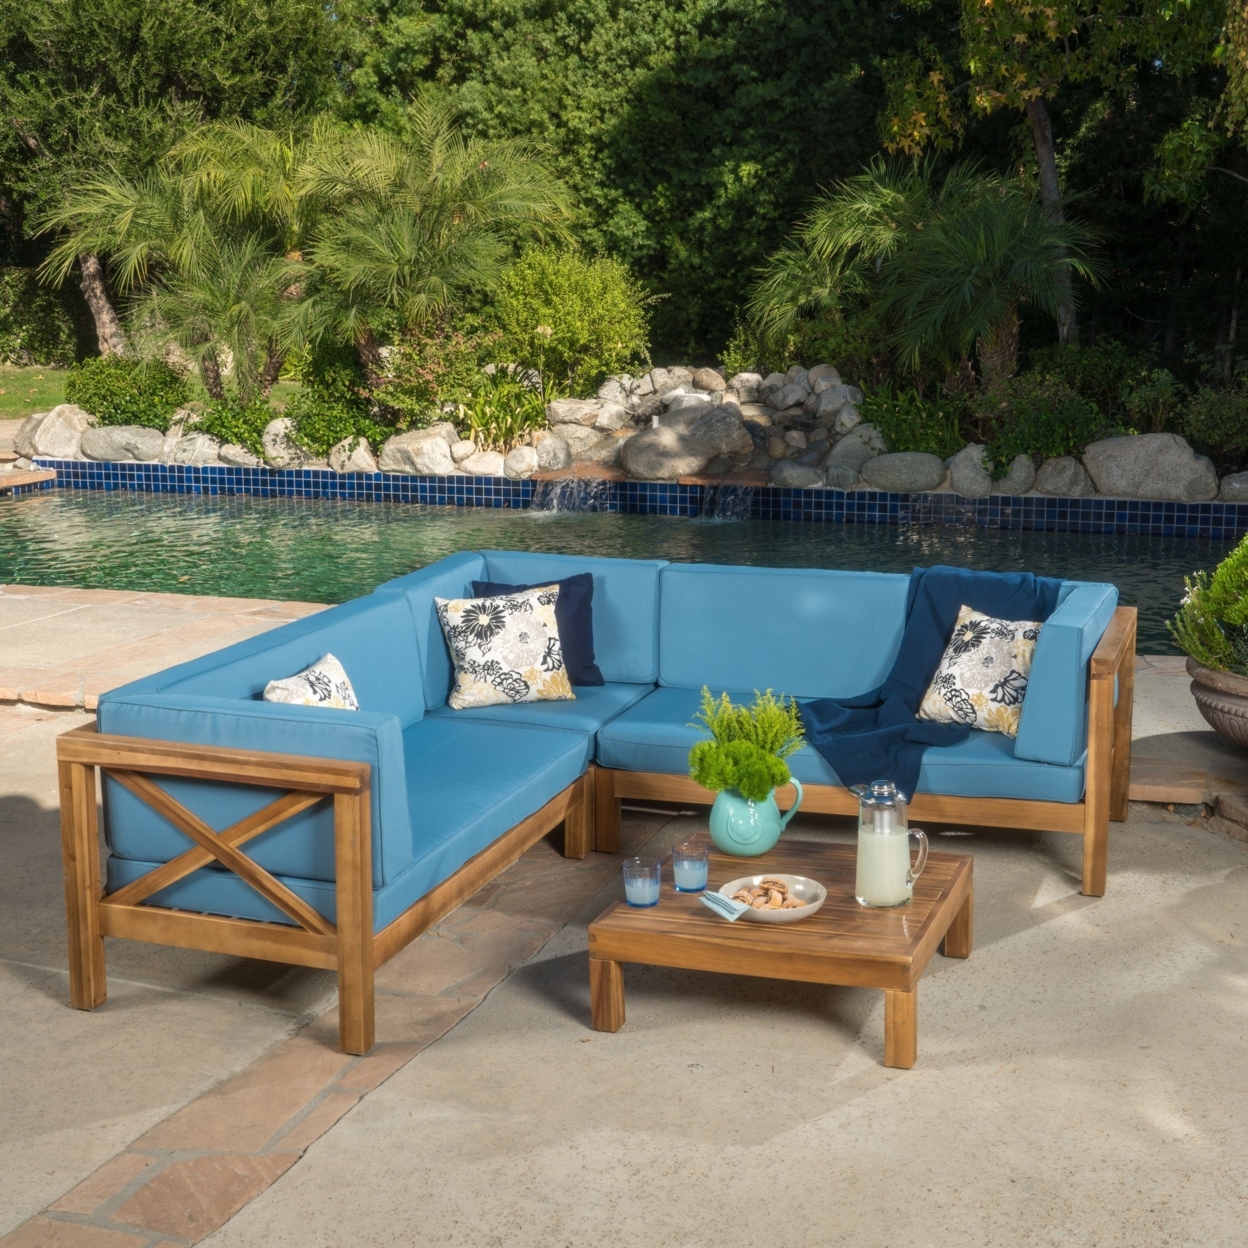 Brava Outdoor 4 Piece V-Shaped Acacia Wood Sectional Sofa And Coffee Table Set - White, Gray